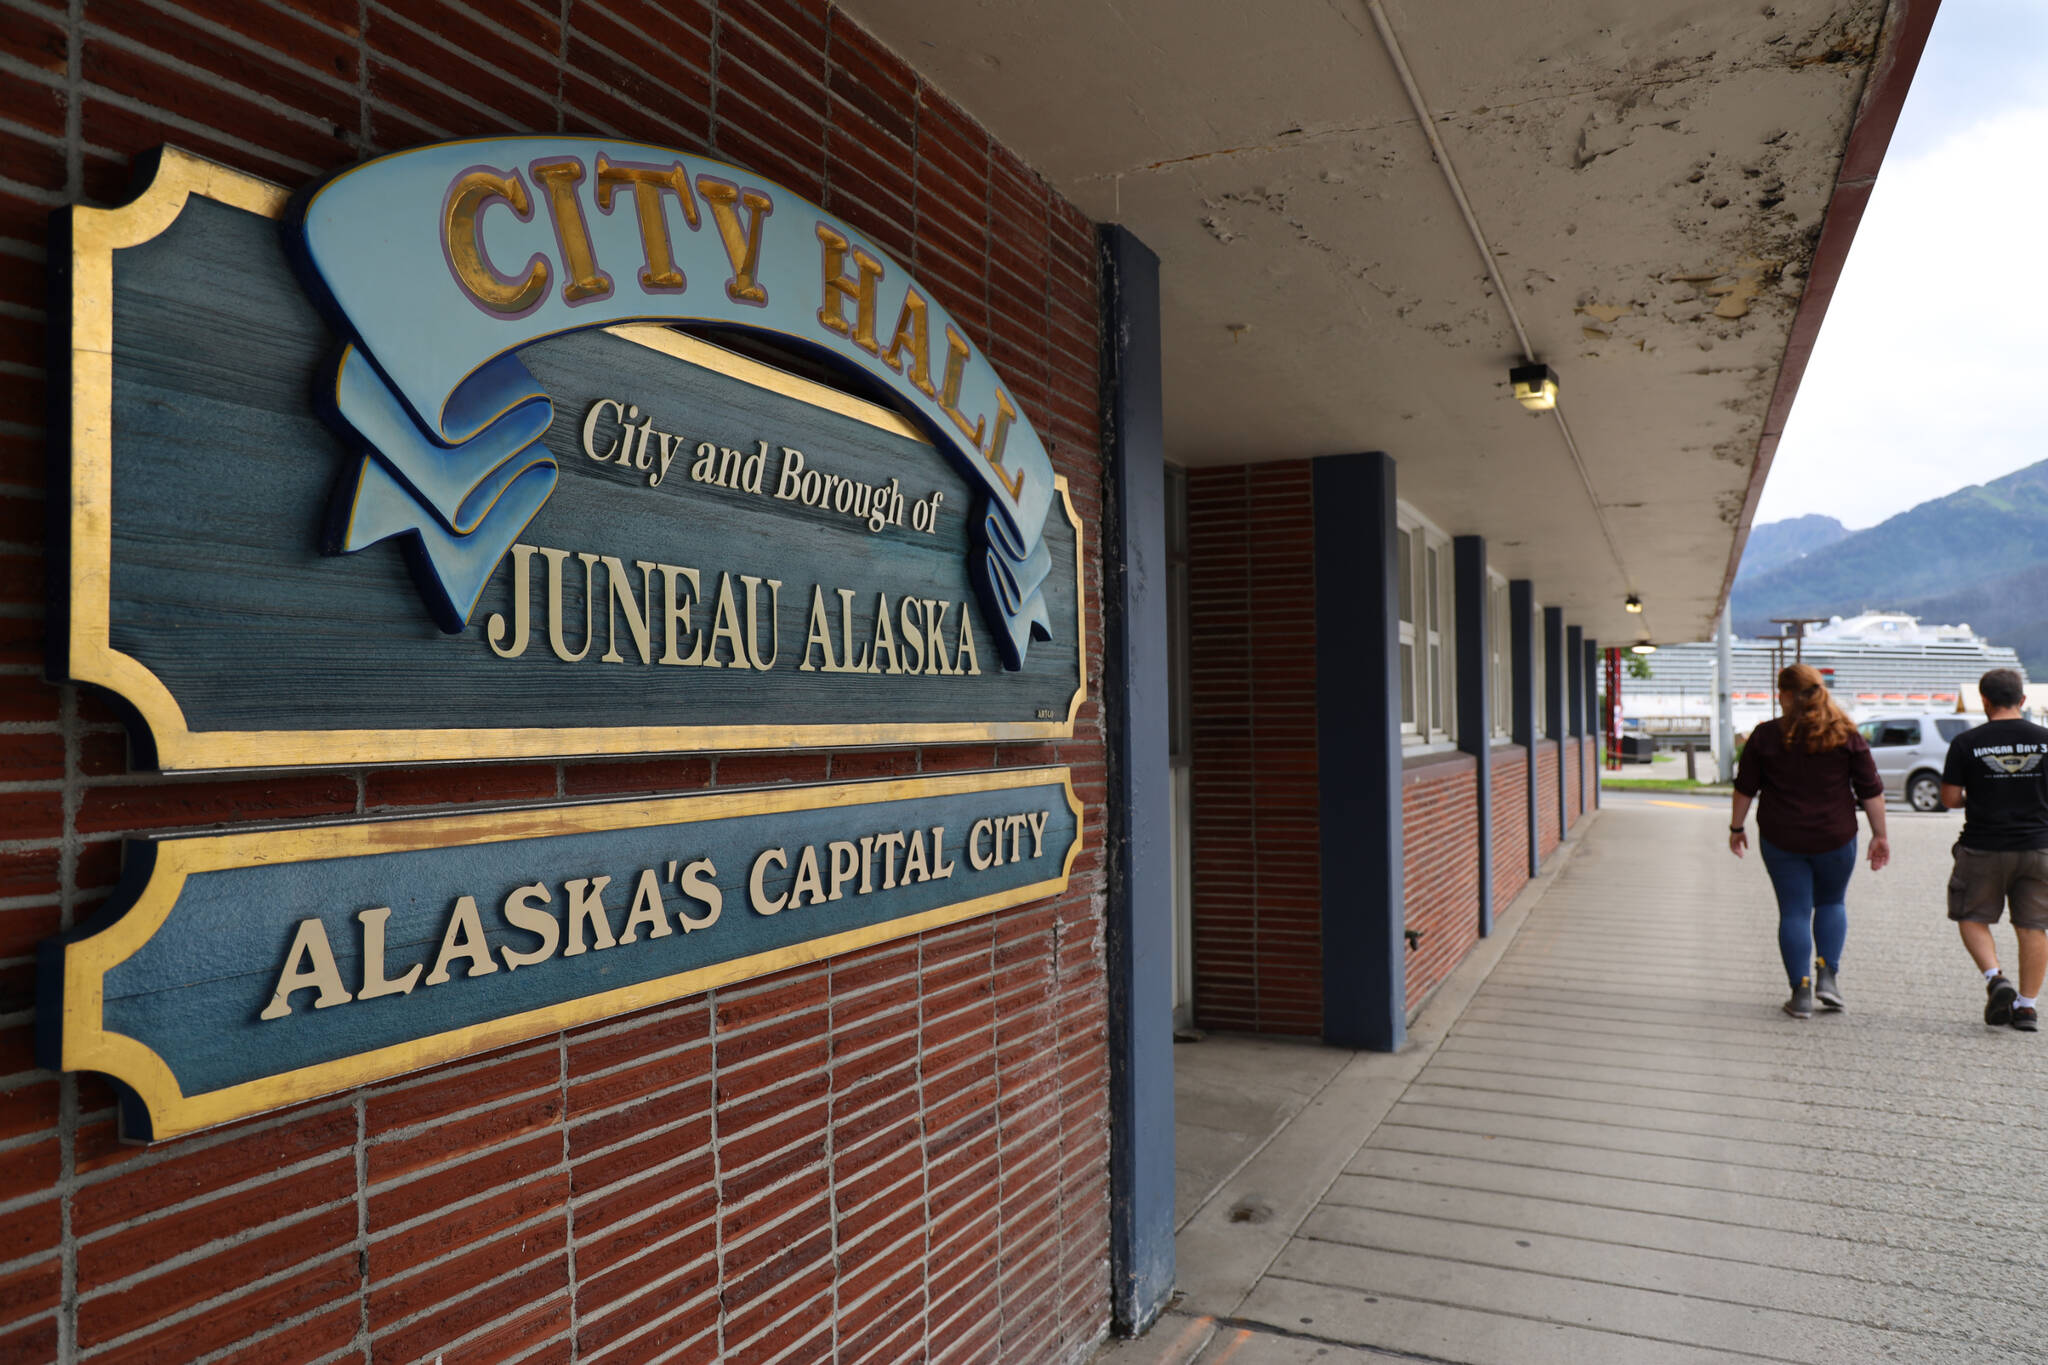 Voters in the City and Borough of Juneau municipal election will decide whether to approve $35 million in bond debt to fund the majority of the construction cost for a new City Hall. (Clarise Larson / Juneau Empire)